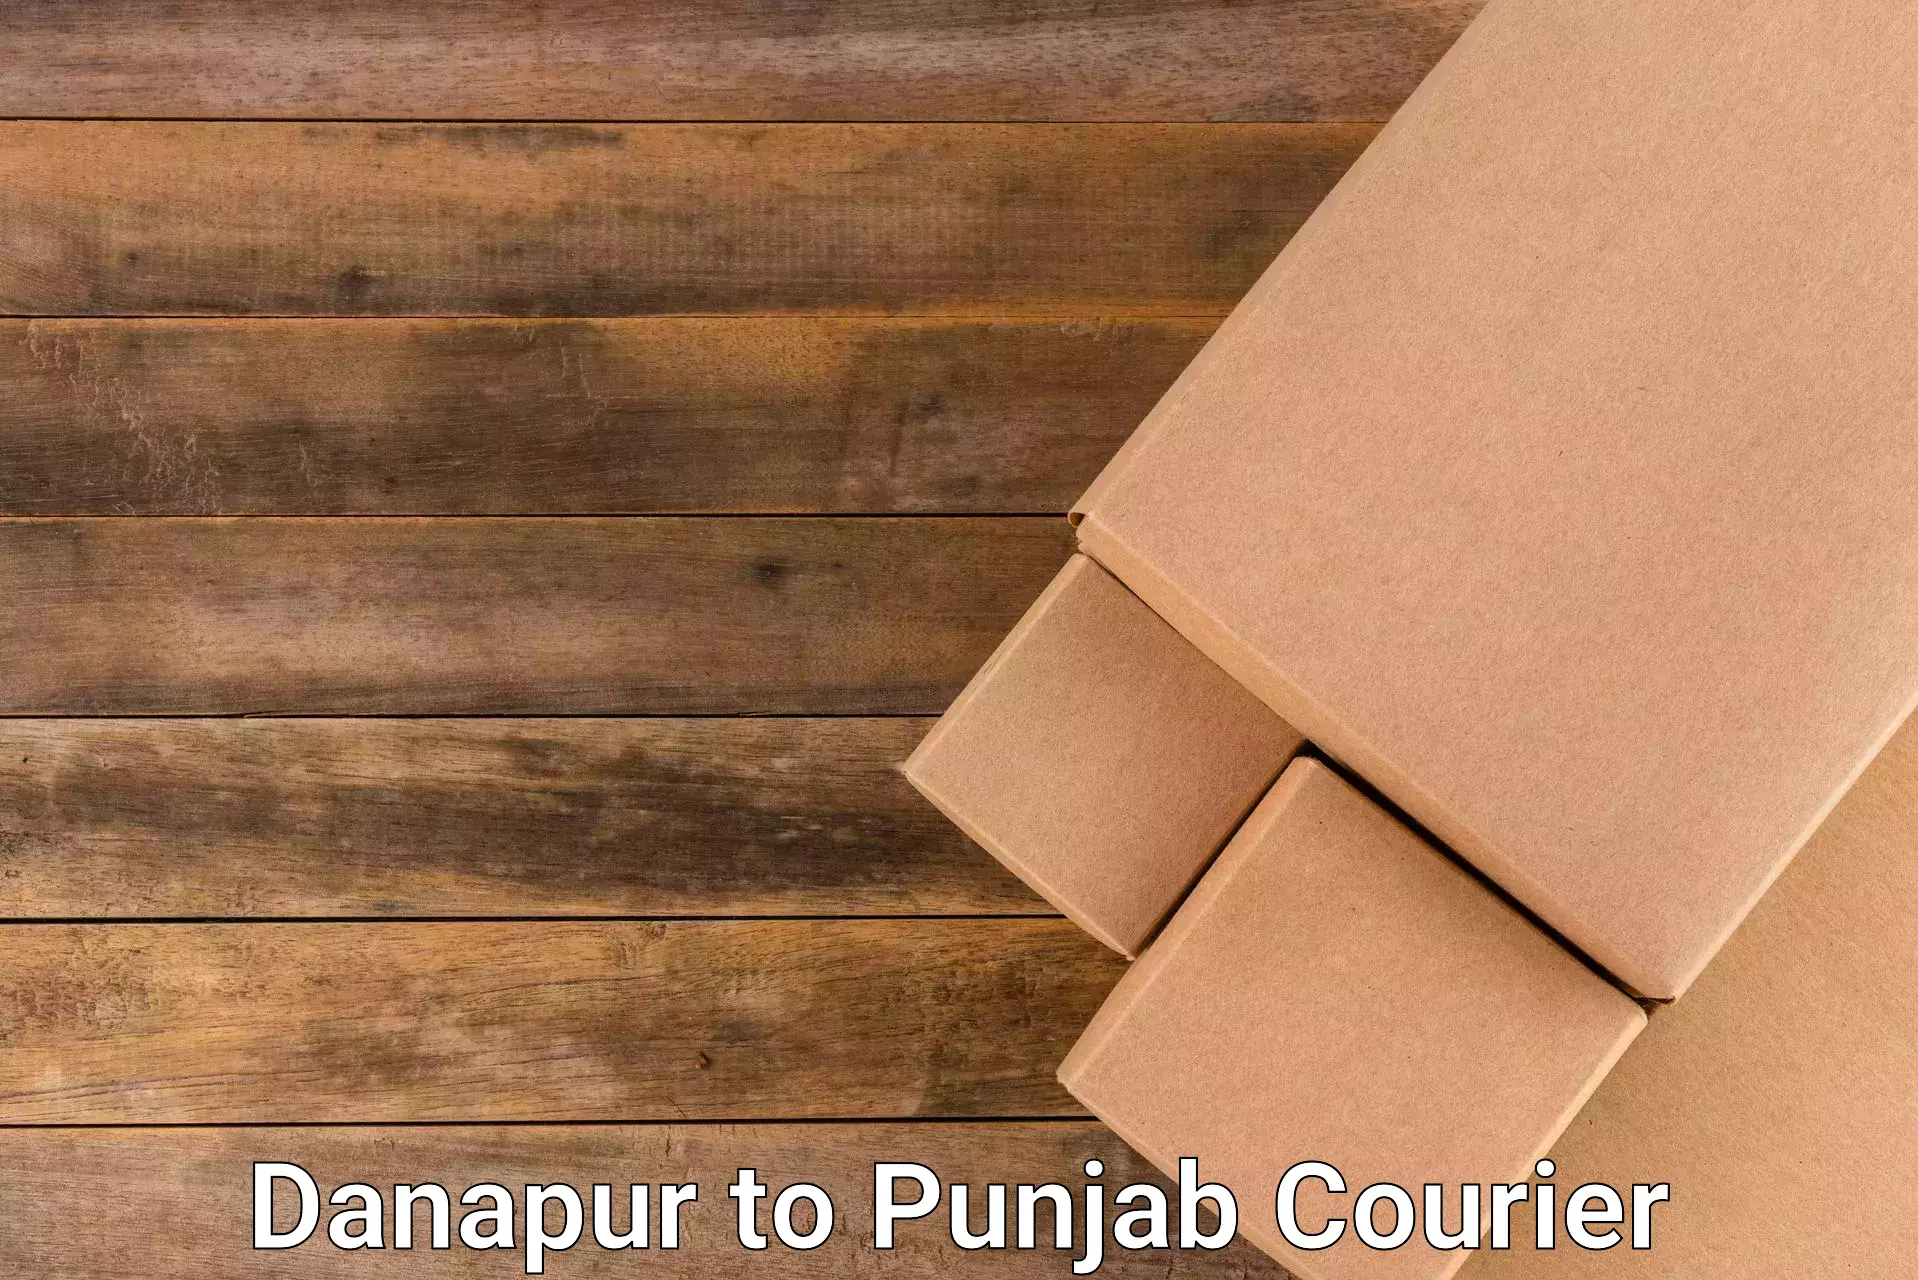 Courier service partnerships in Danapur to Punjab